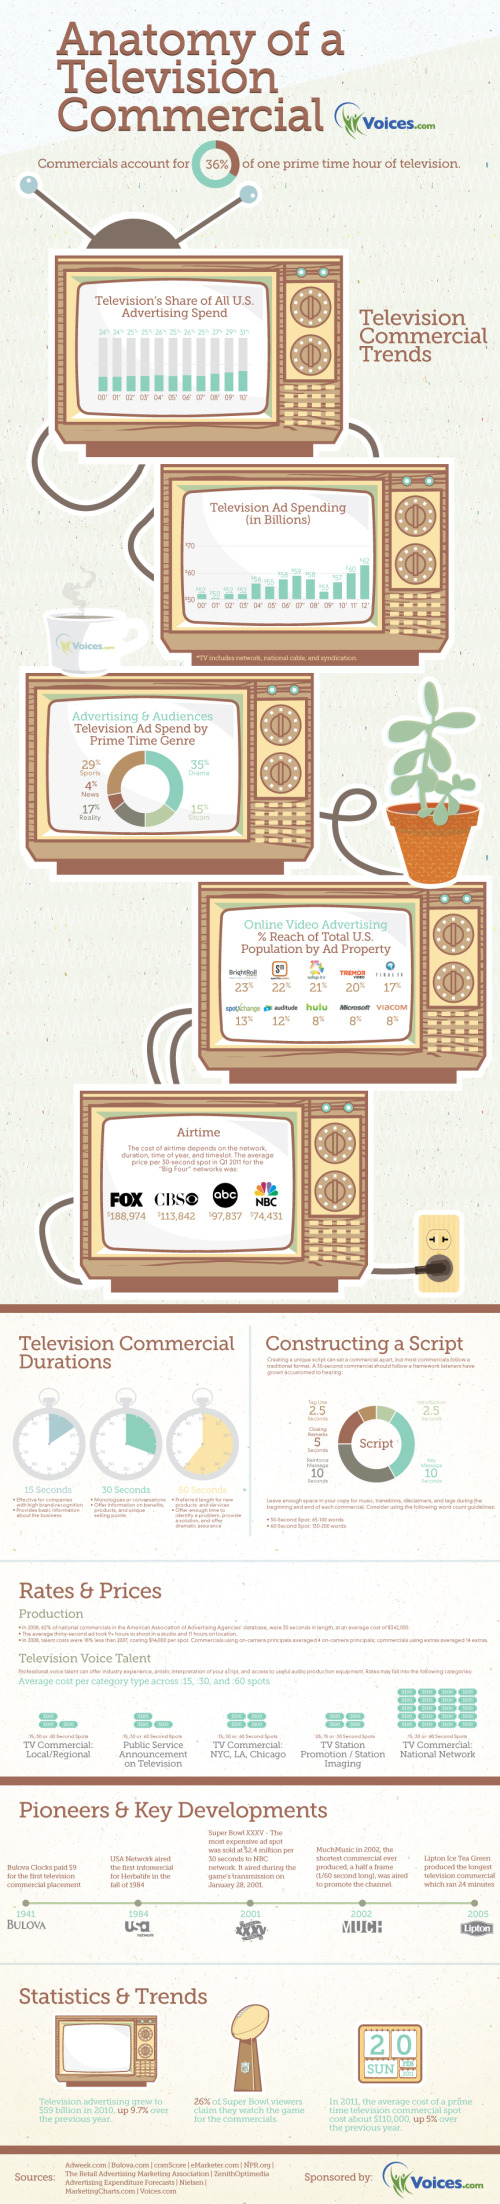 Anatomy of a Television Commercial infographic